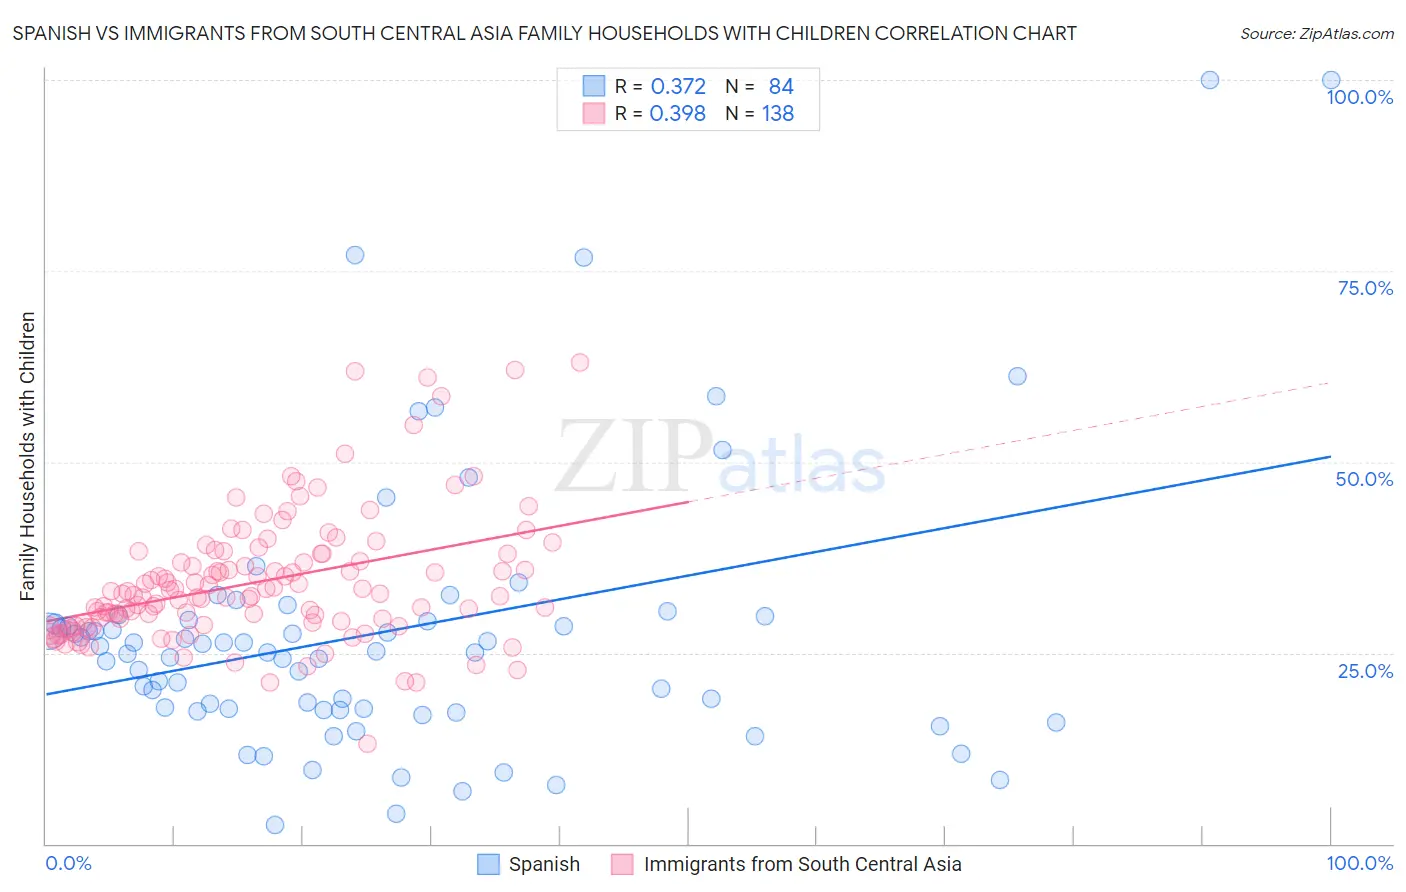 Spanish vs Immigrants from South Central Asia Family Households with Children